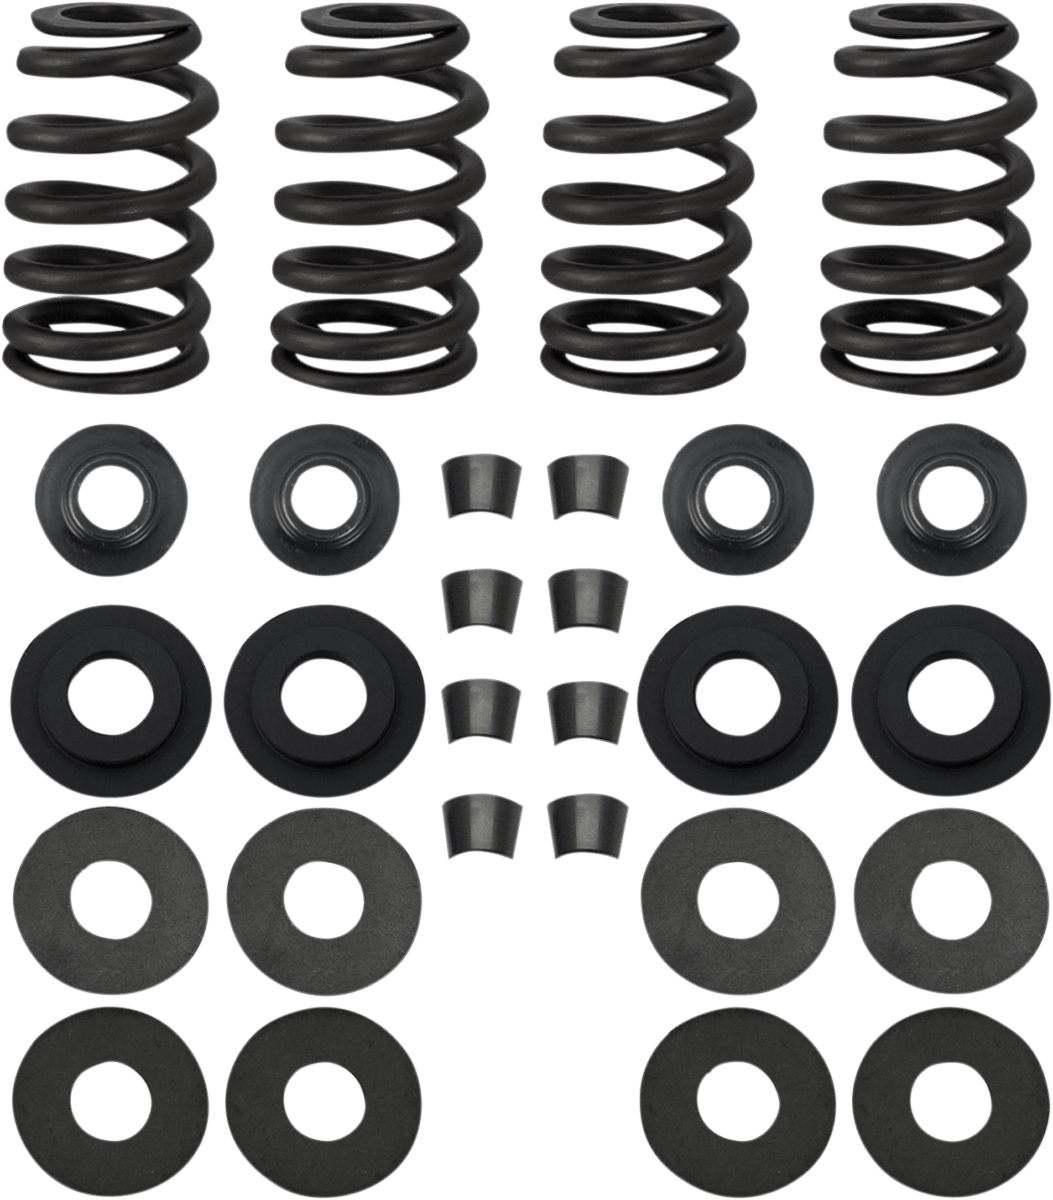 S&S CYCLES-.585" Street Performance Valve Spring Kits / '88-'17 Models-Valve Springs / Retainers / Seals-MetalCore Harley Supply